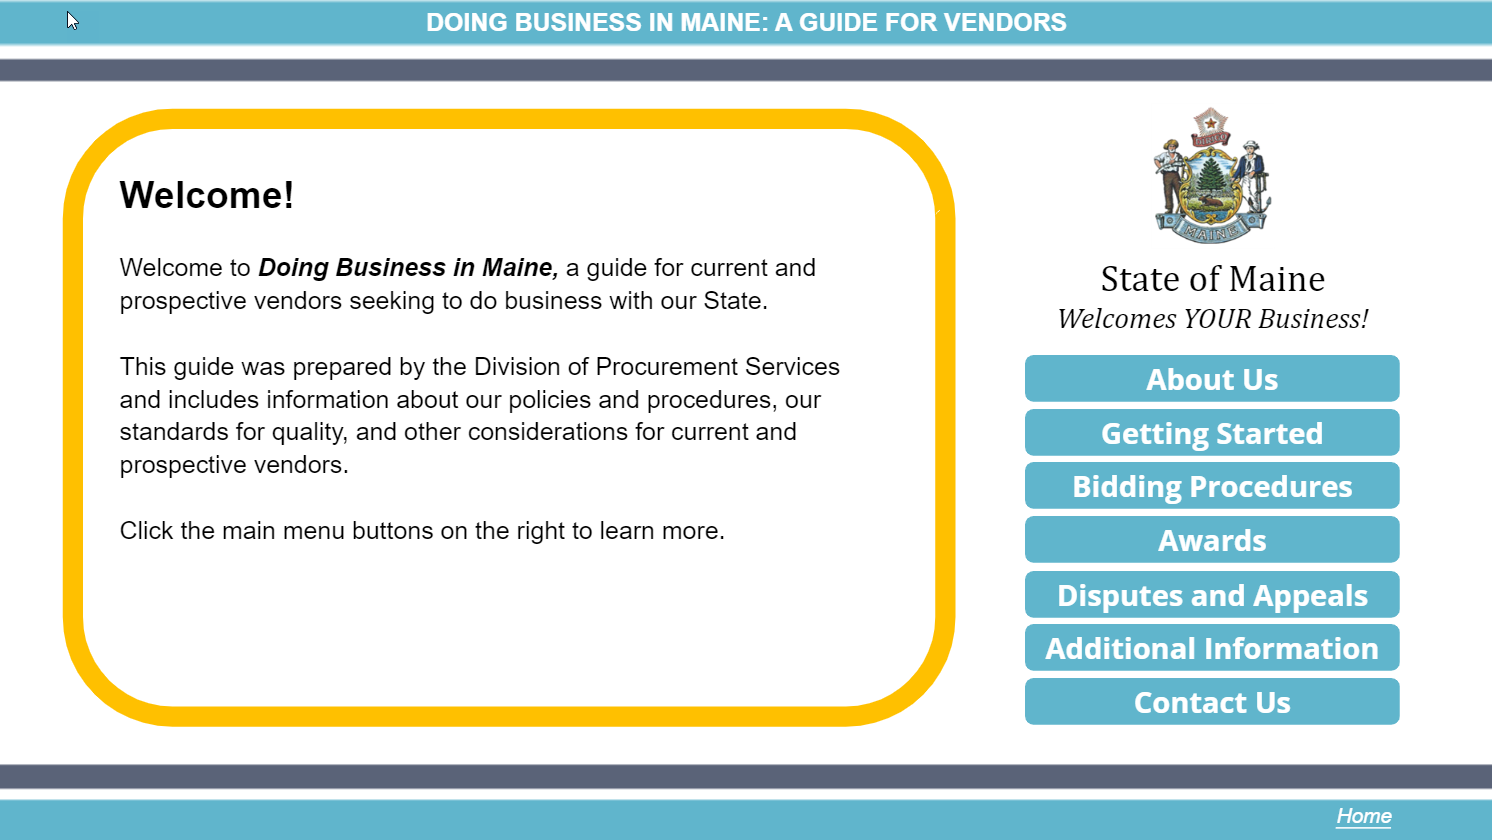 Articulate file for Doing Business in Maine